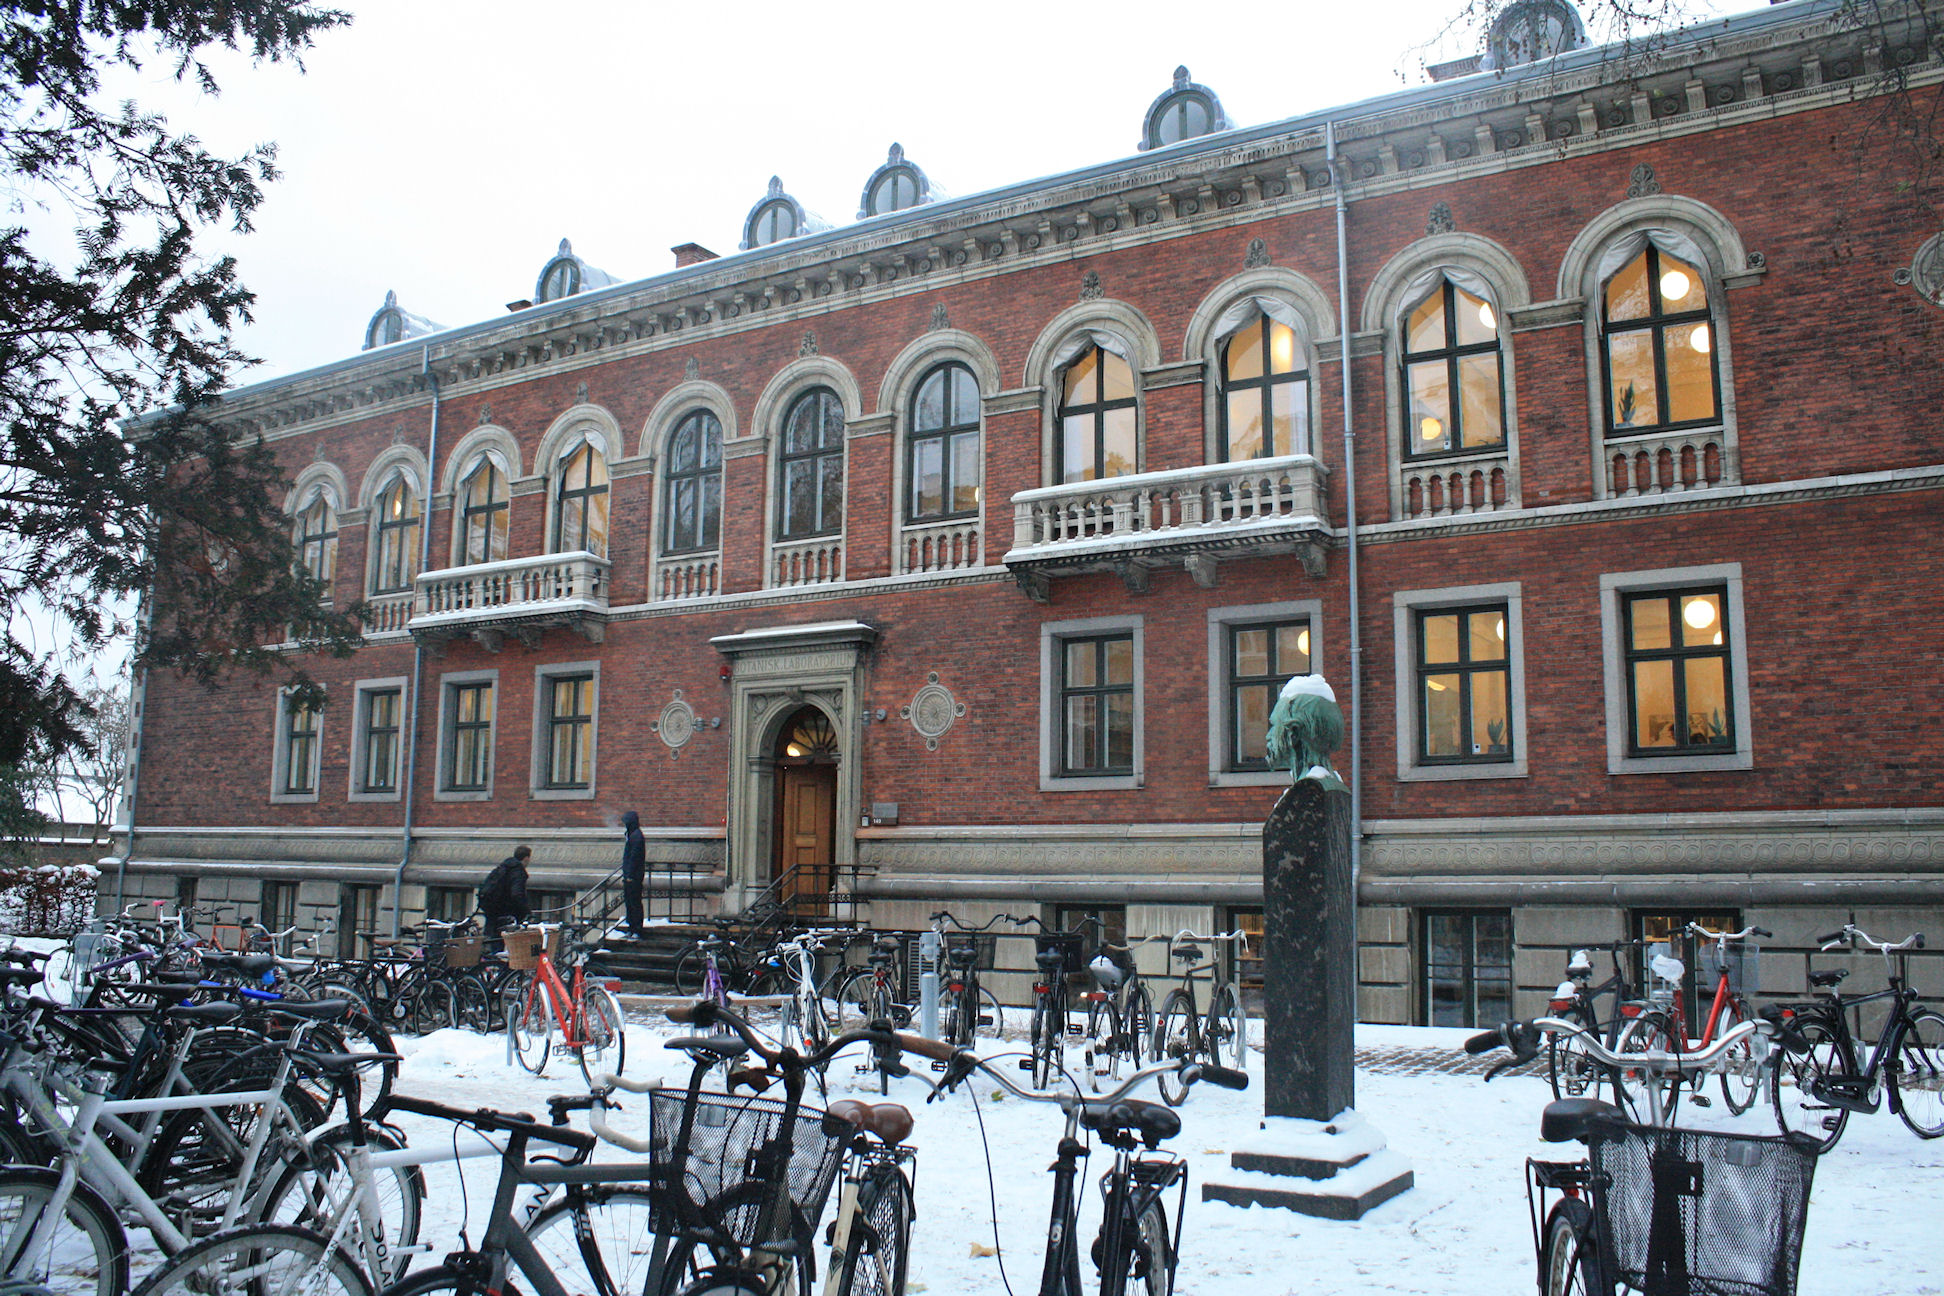 several bicycles are parked in front of a red brick building